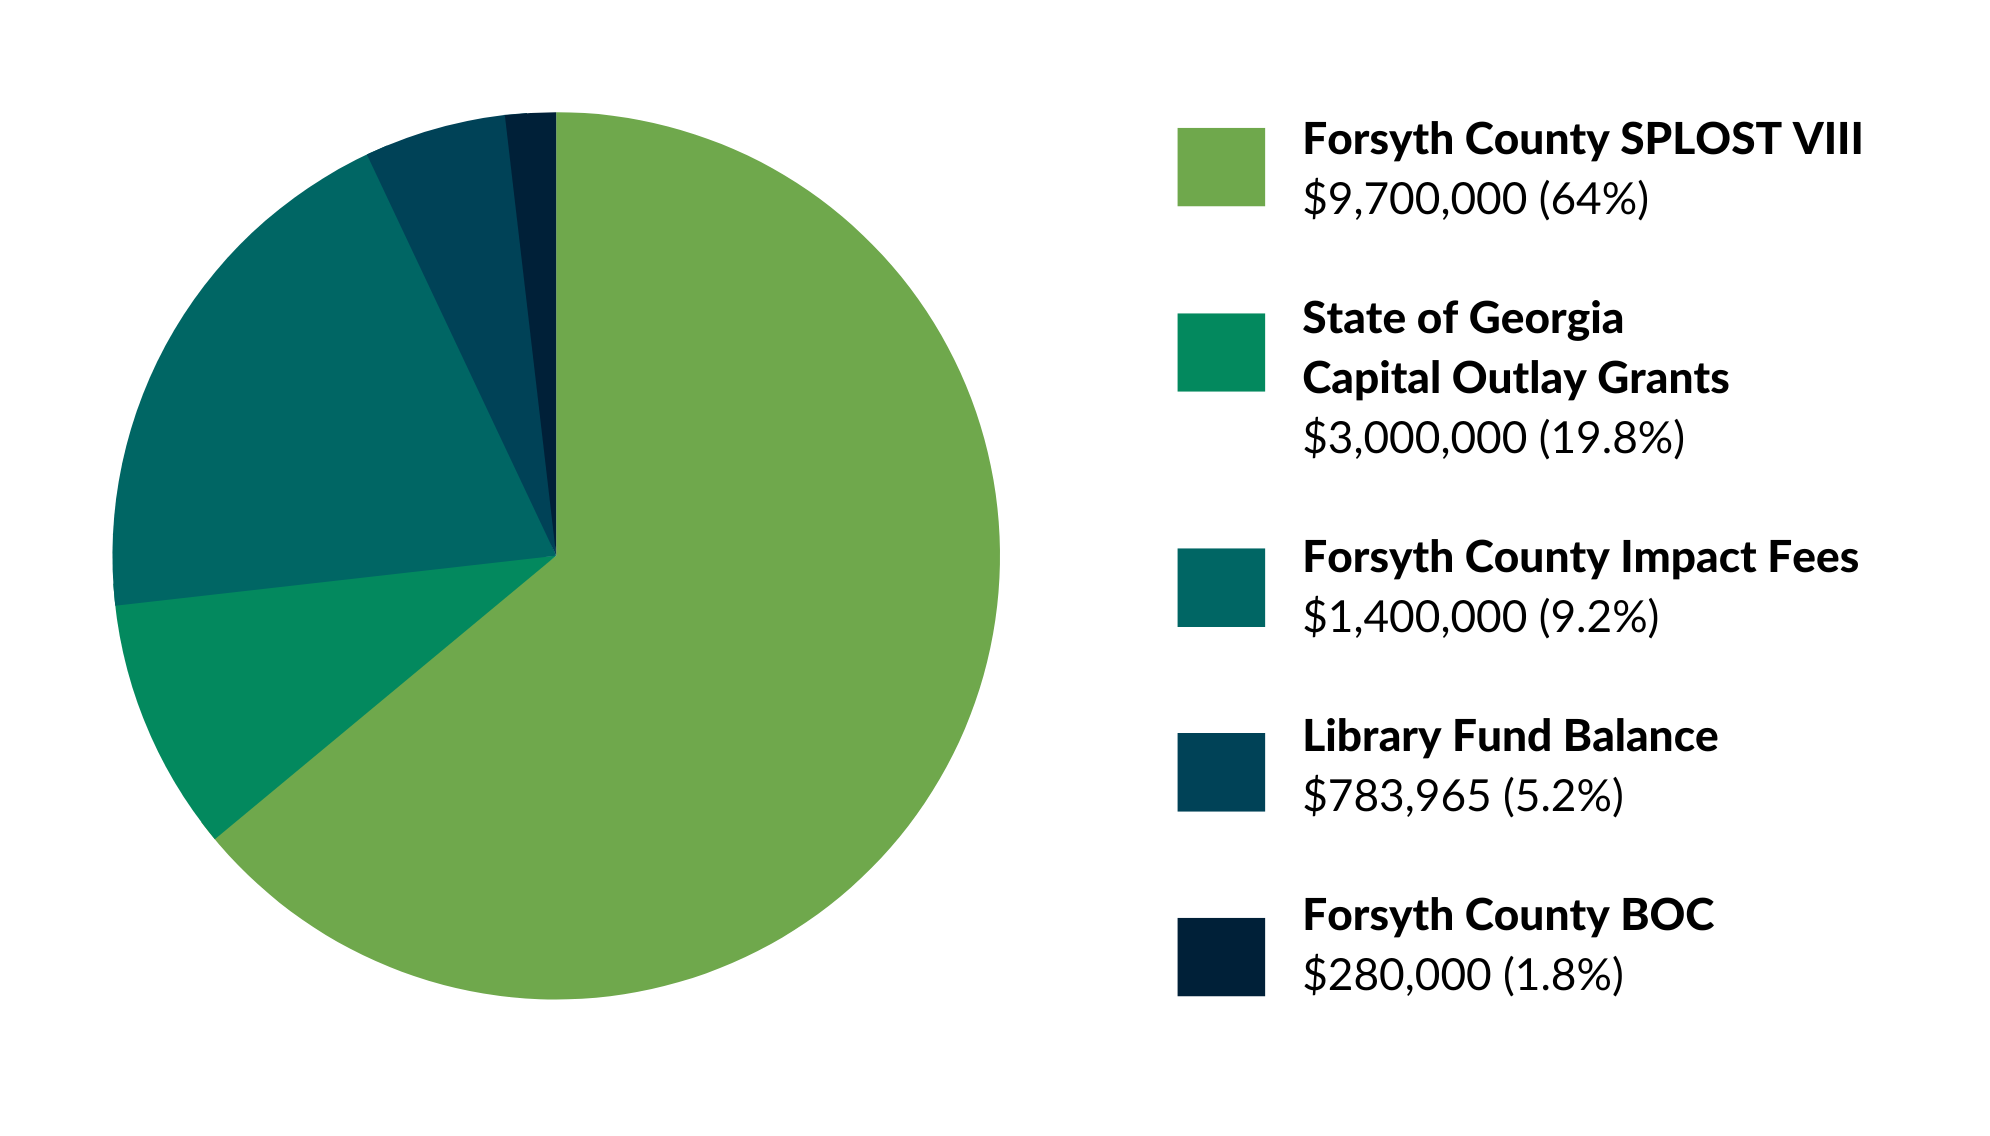 Denmark Library Funding illustrated with a pie chart